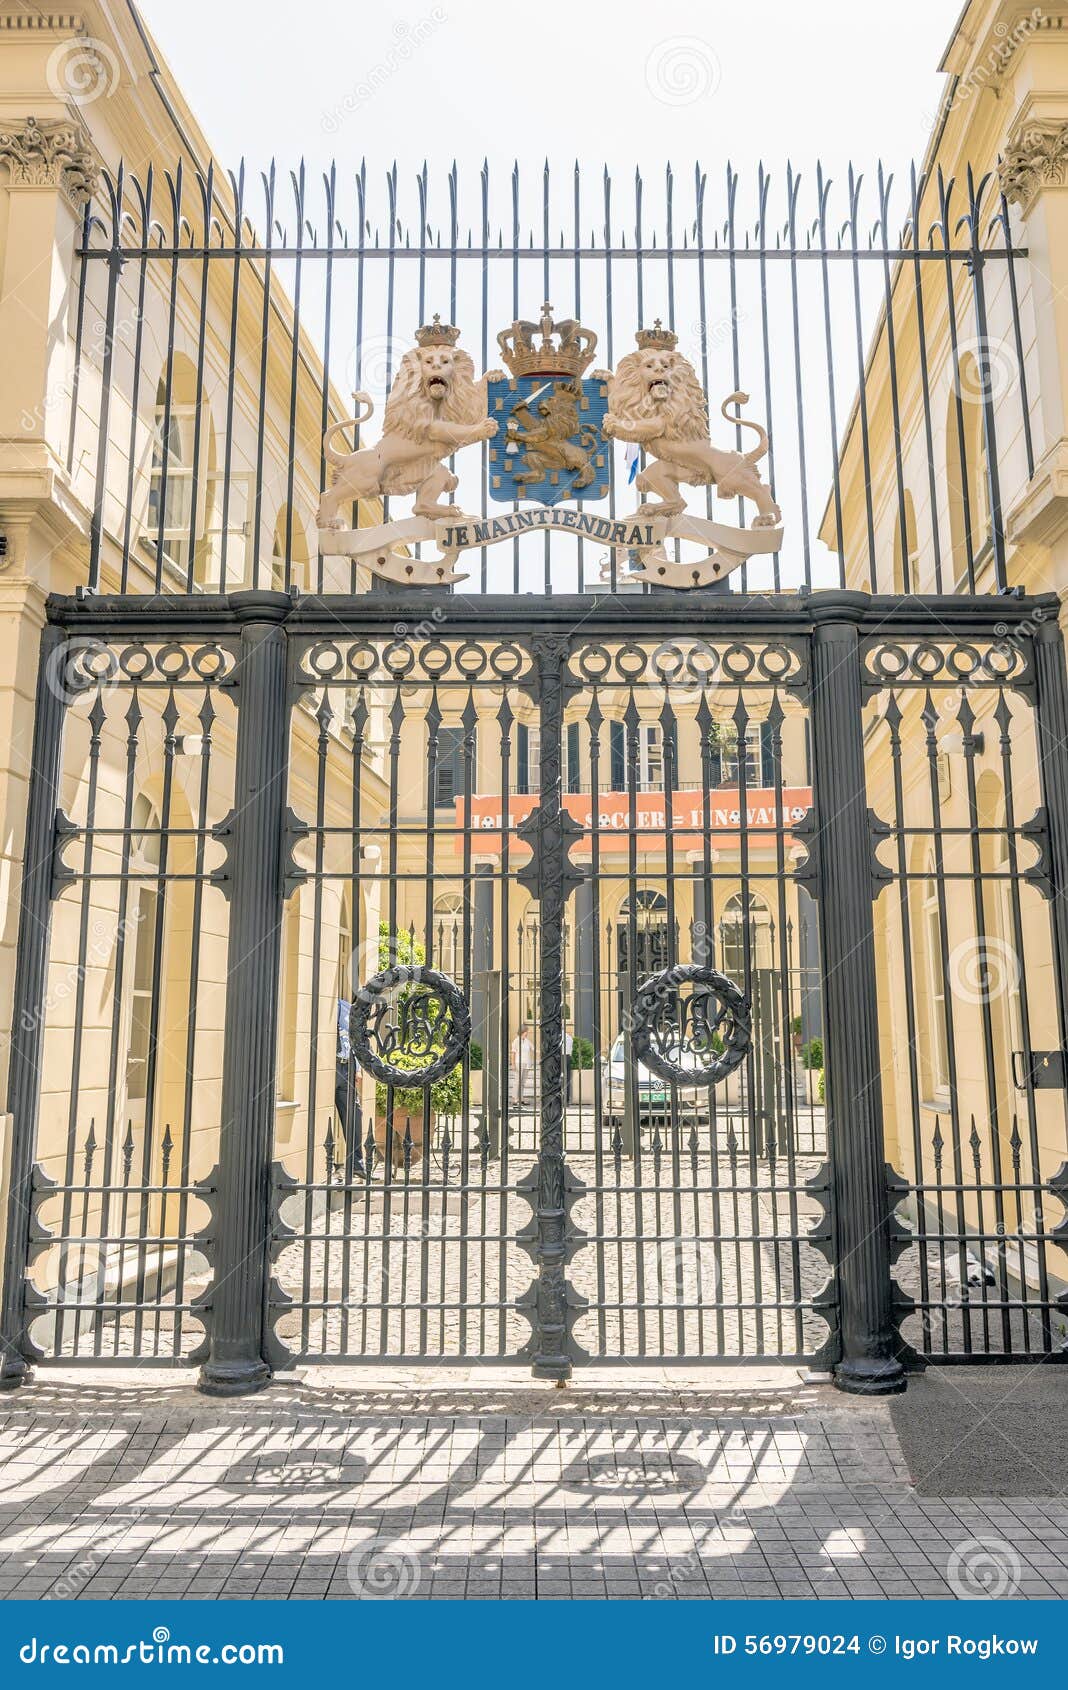 the gates of the embassy of the netherlands in the tourist center of istanbul turkey shops and cafes editorial stock image image of famous buildings 56979024